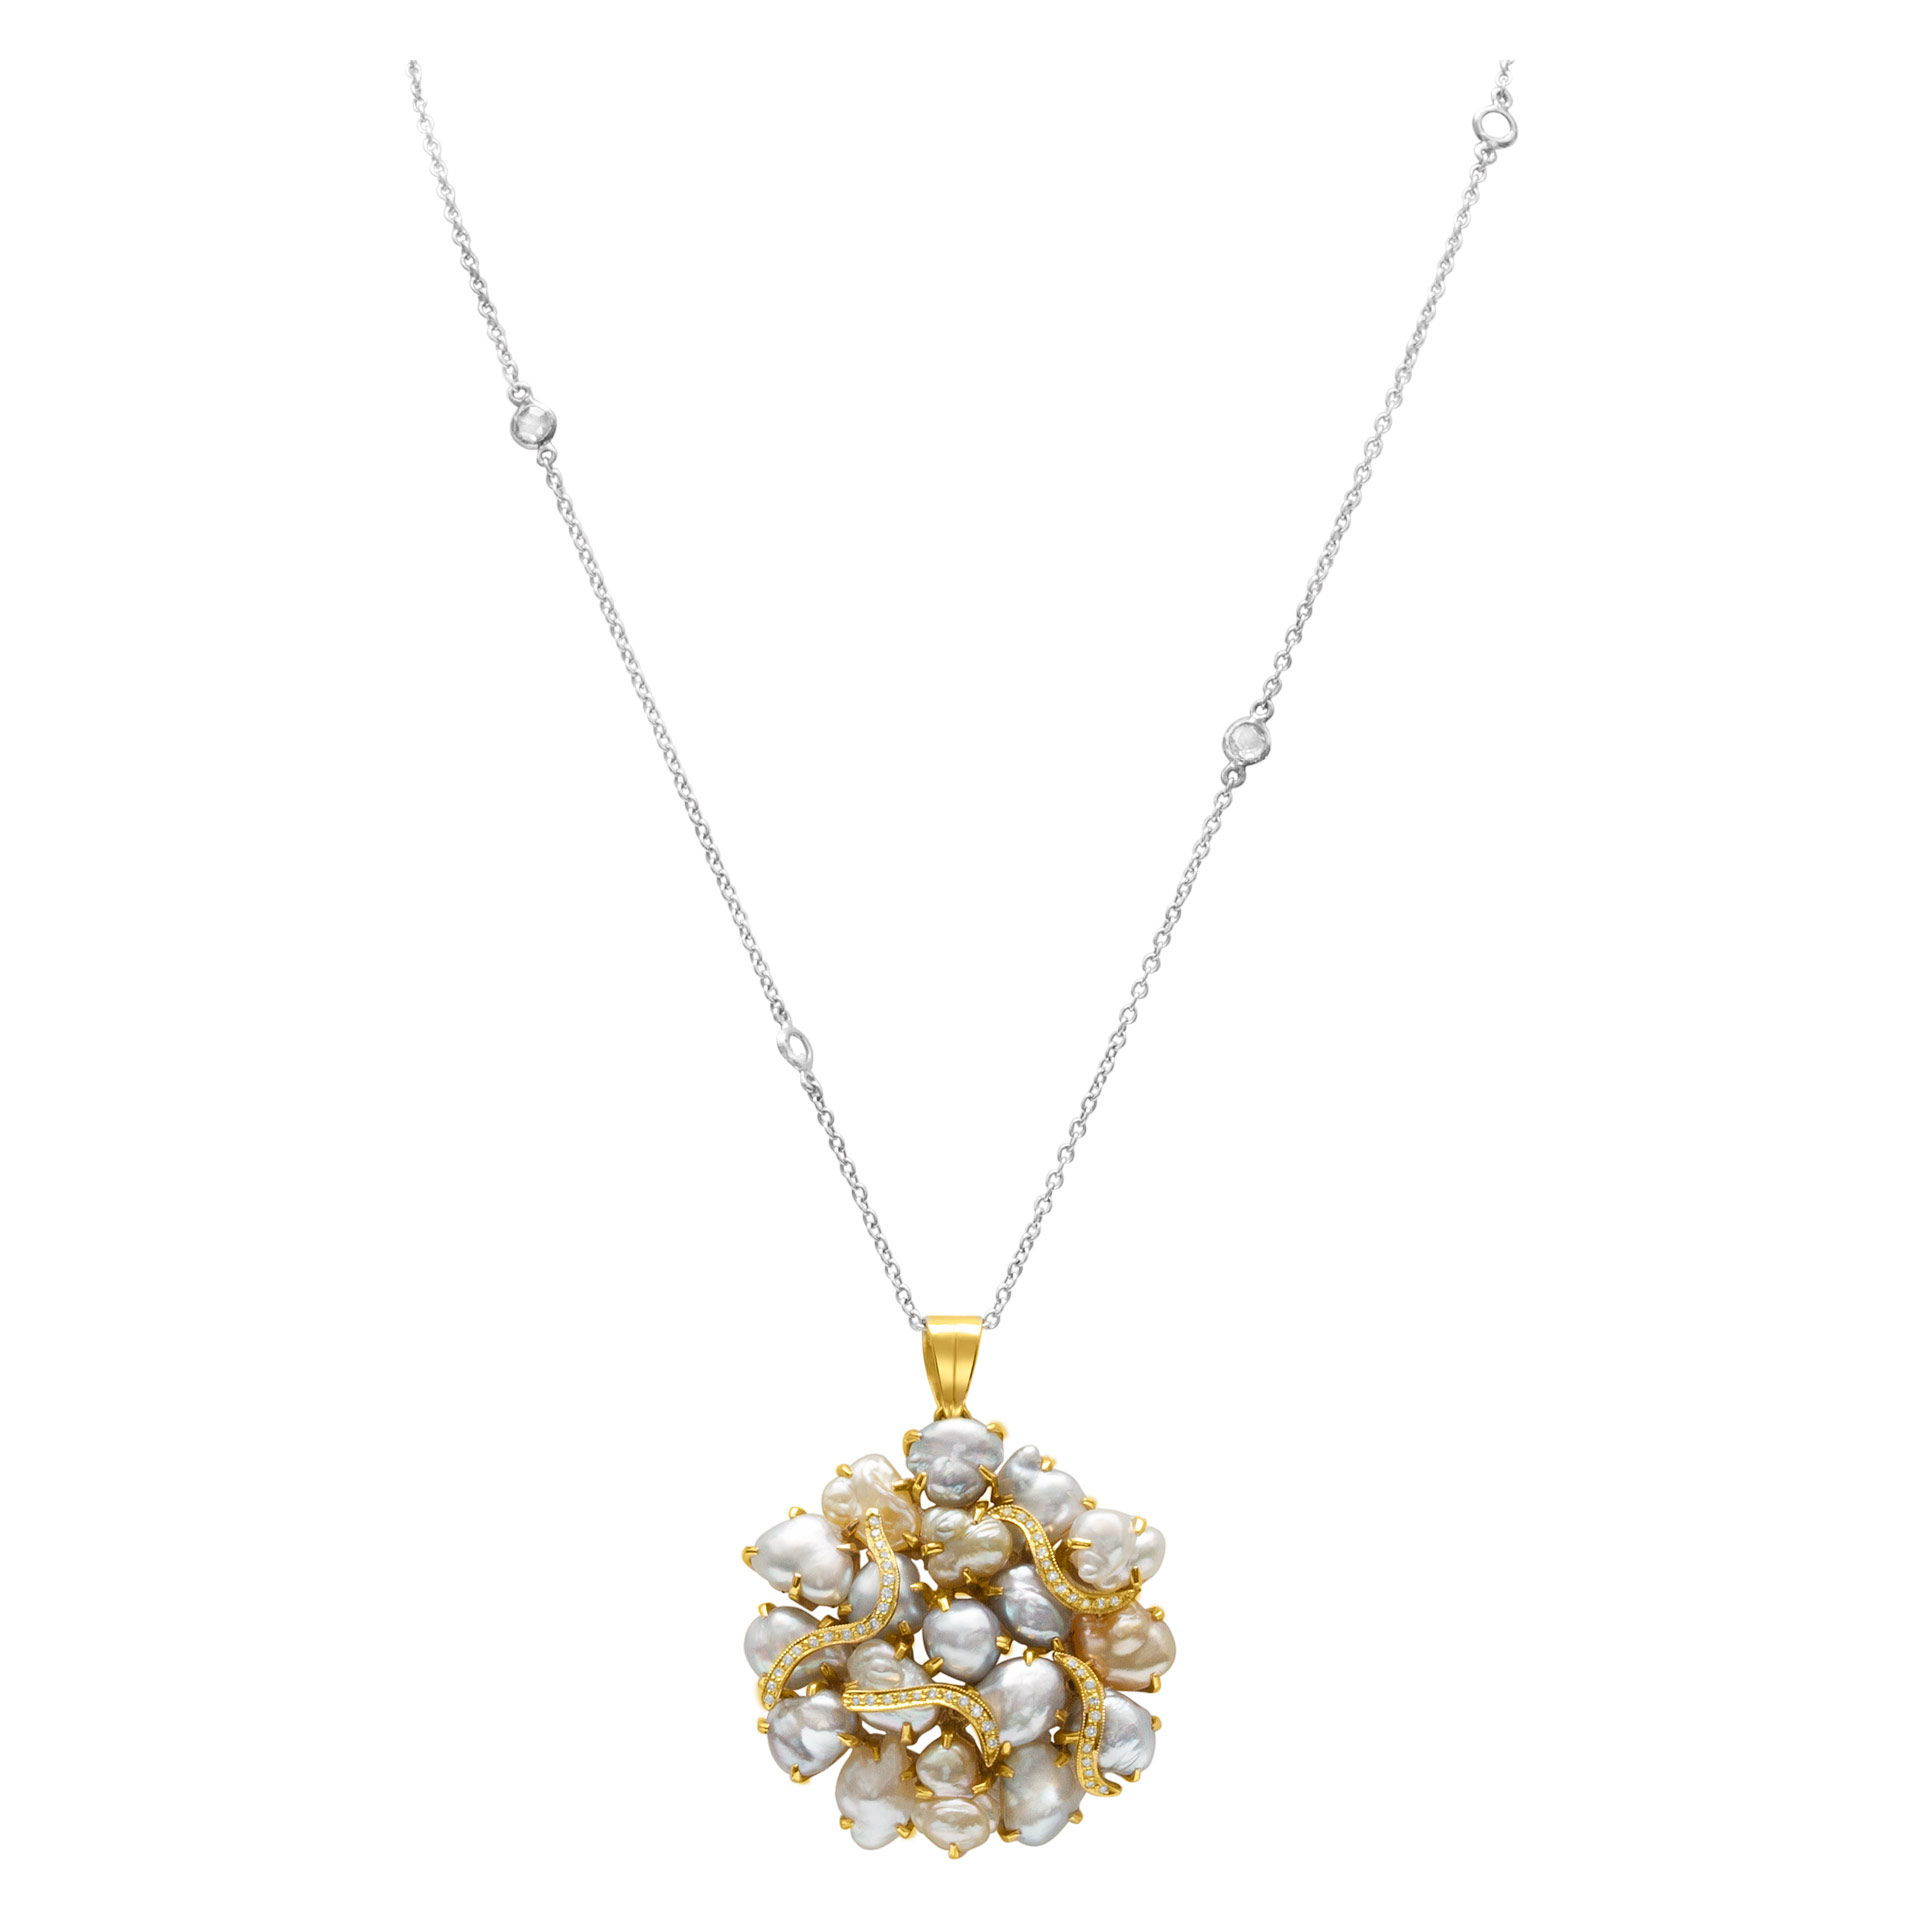 Pearl pendant with 0.95 cts in diamond accents image 2